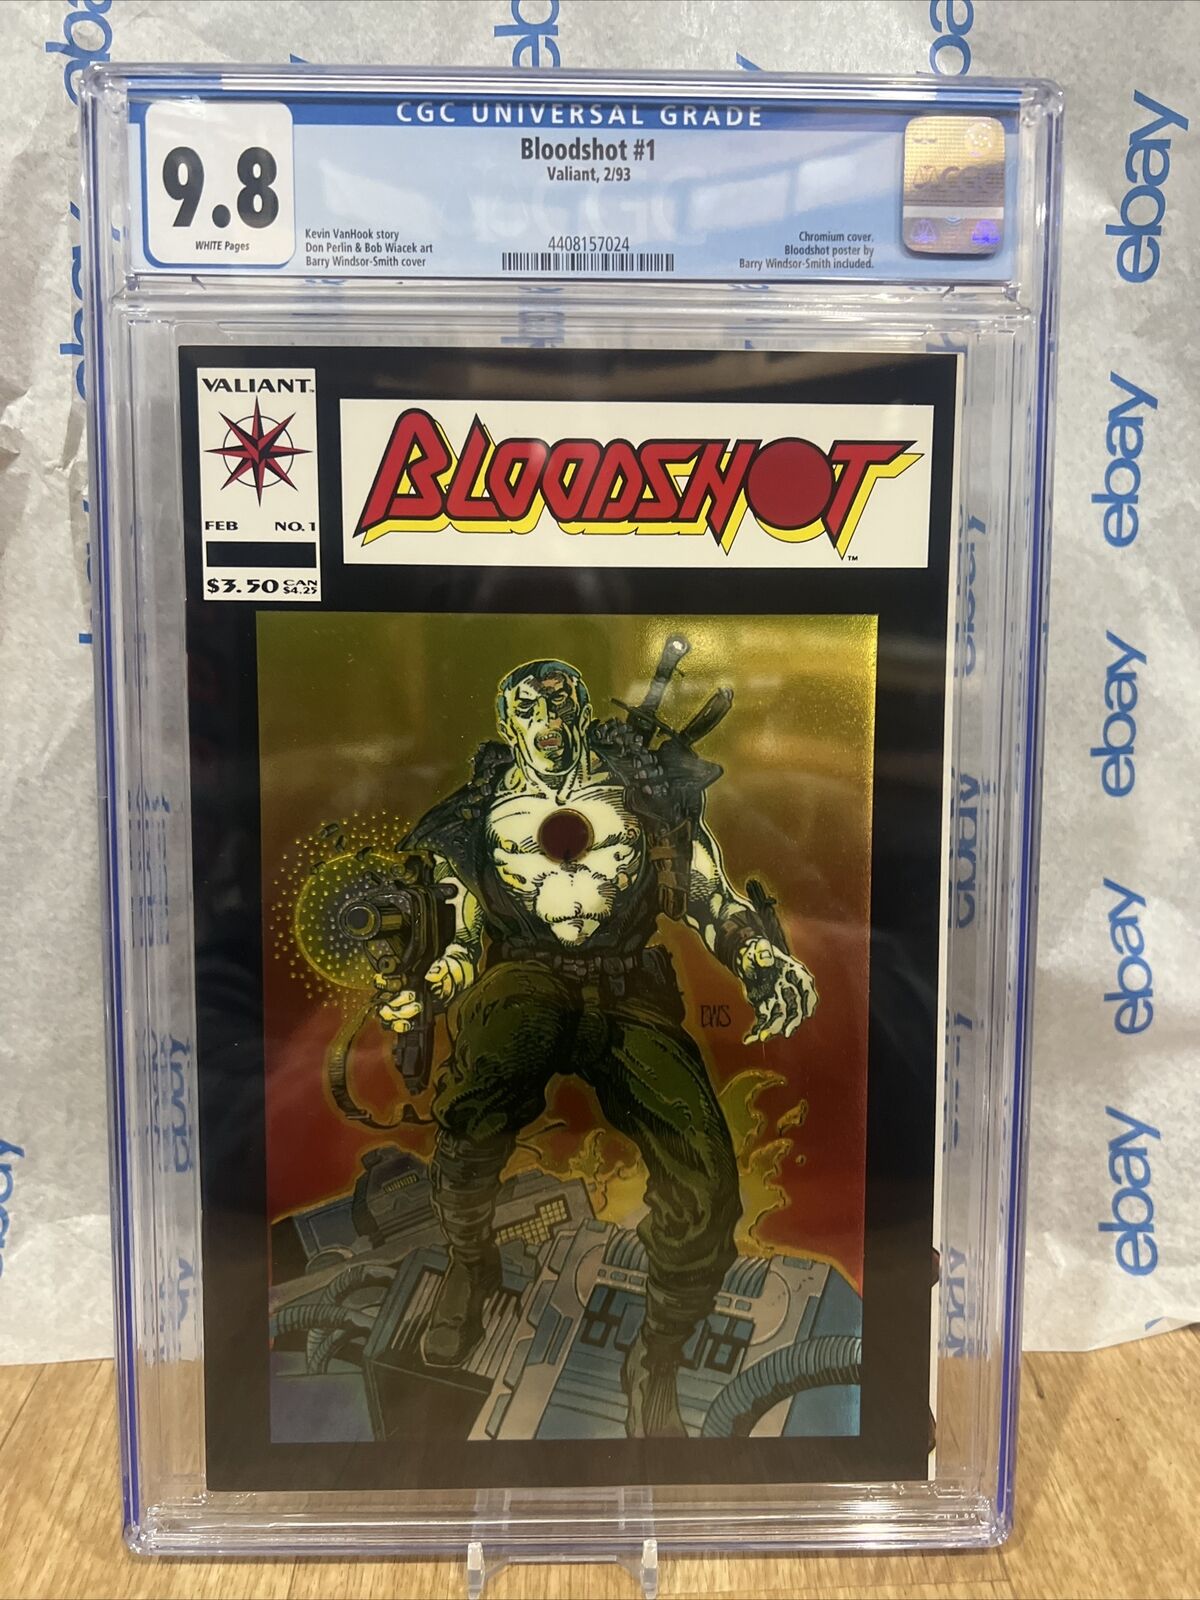 1993 Valiant BLOODSHOT # 1 CGC 9.8 White Pages, Chromium Cover by BWS